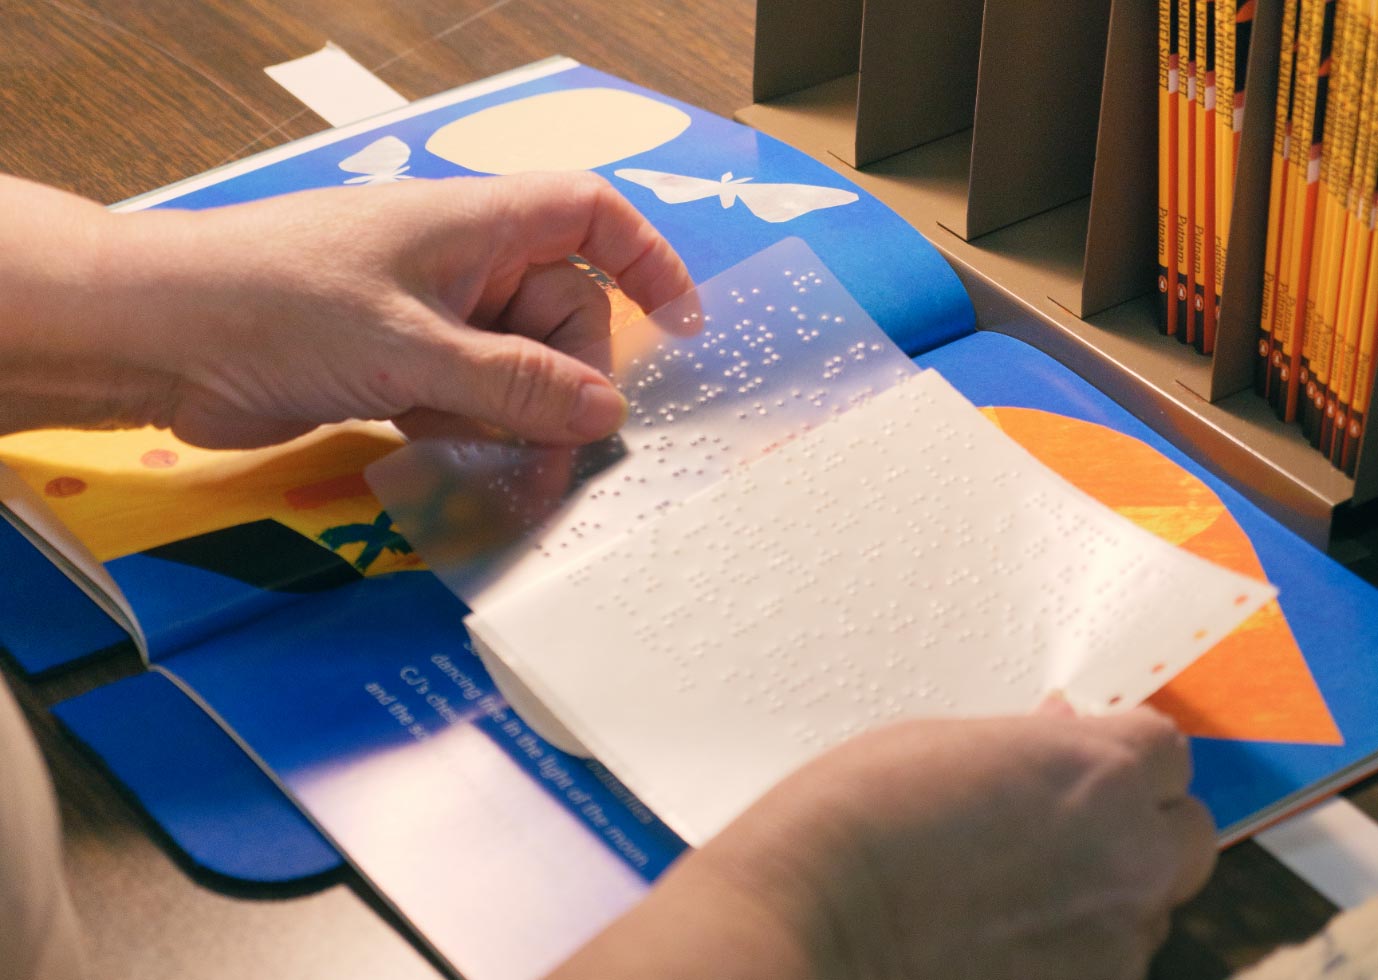 A braille overlay being applied to a print book